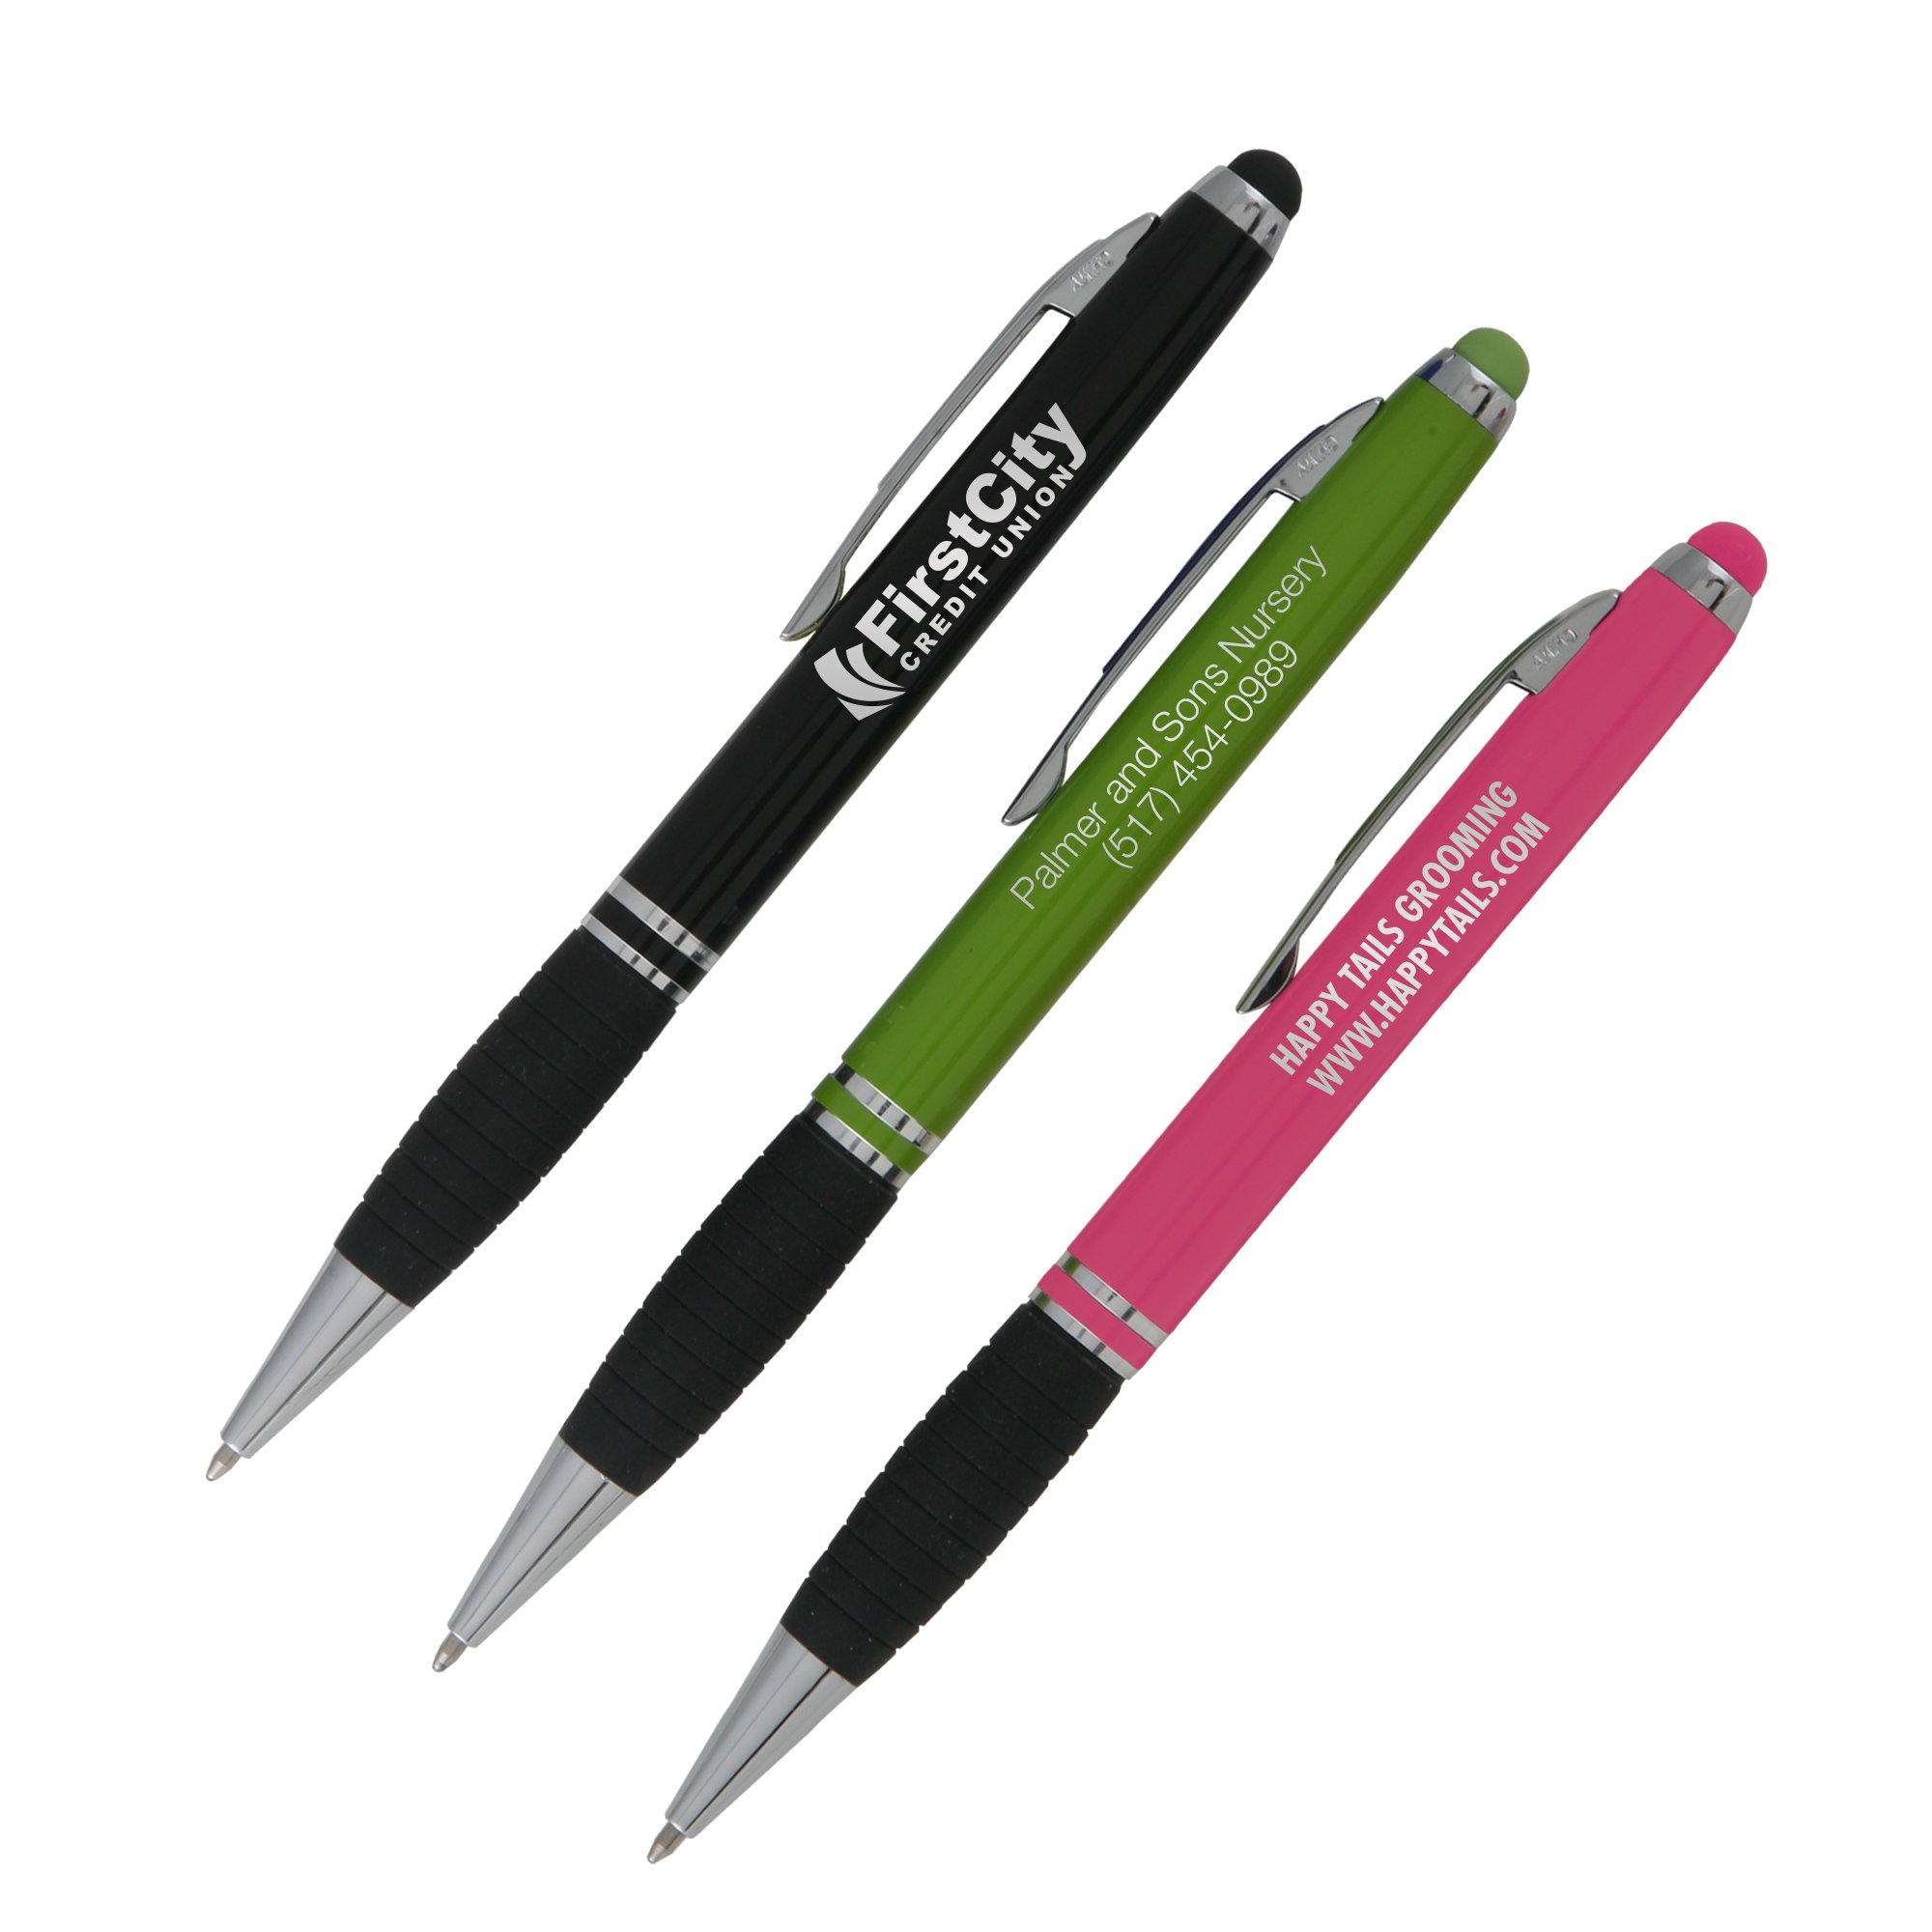 Promotional Fashion Pen and Stylus National Pen